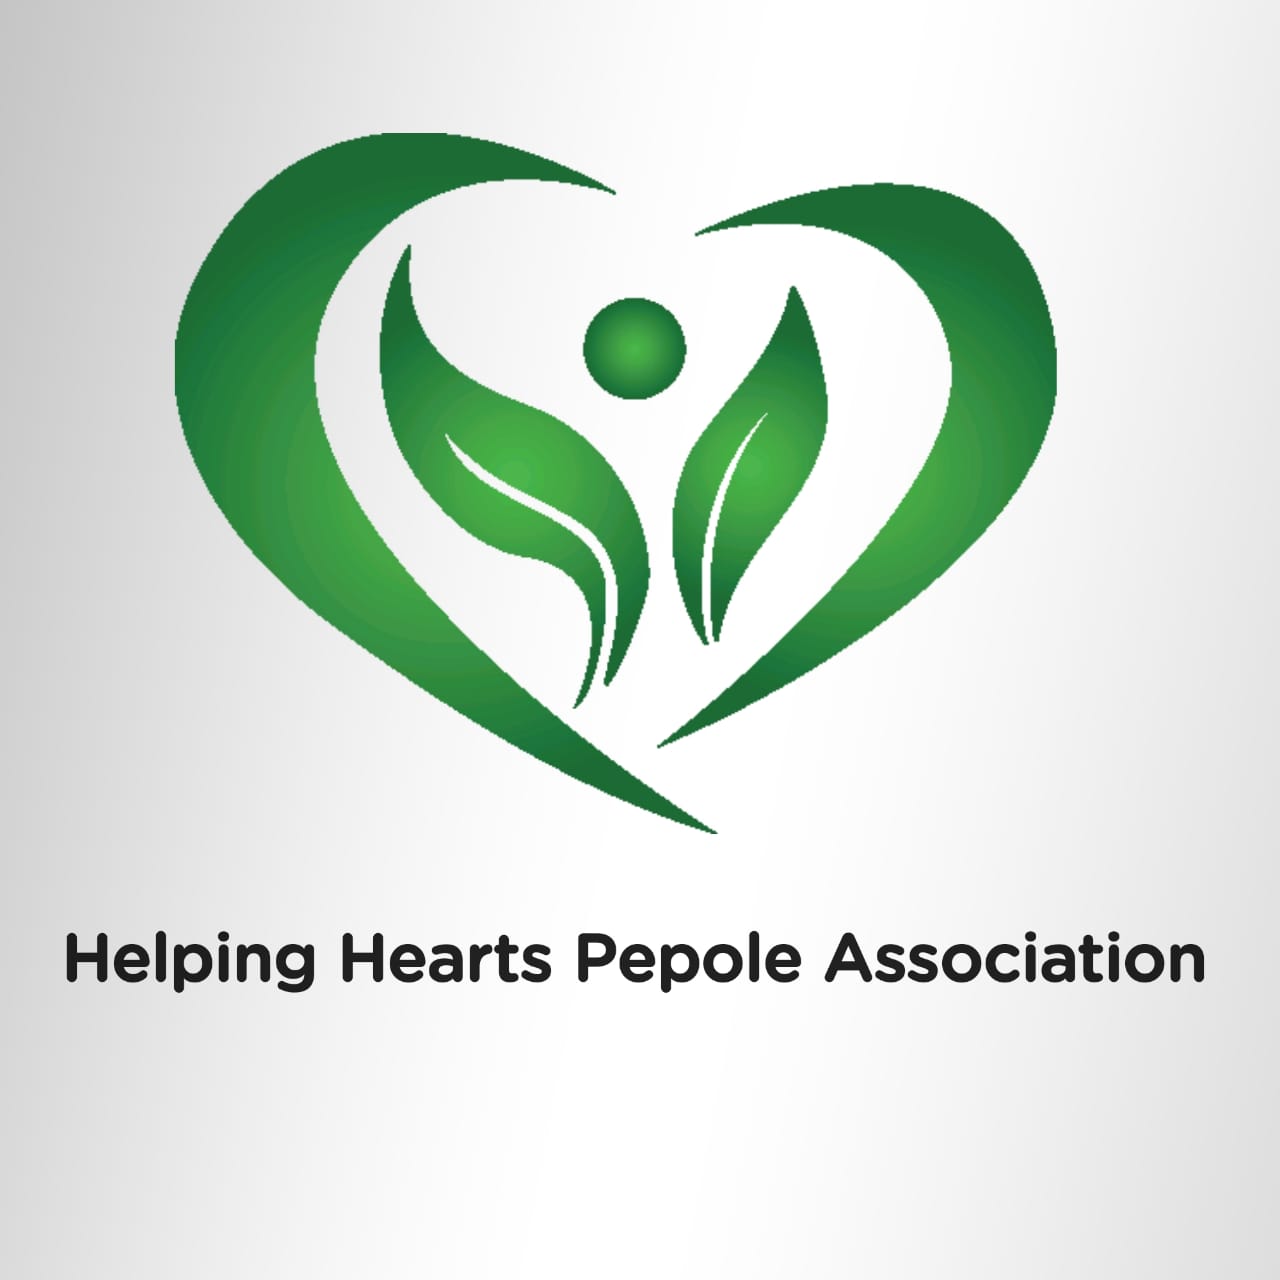 Helping Hearts People Association